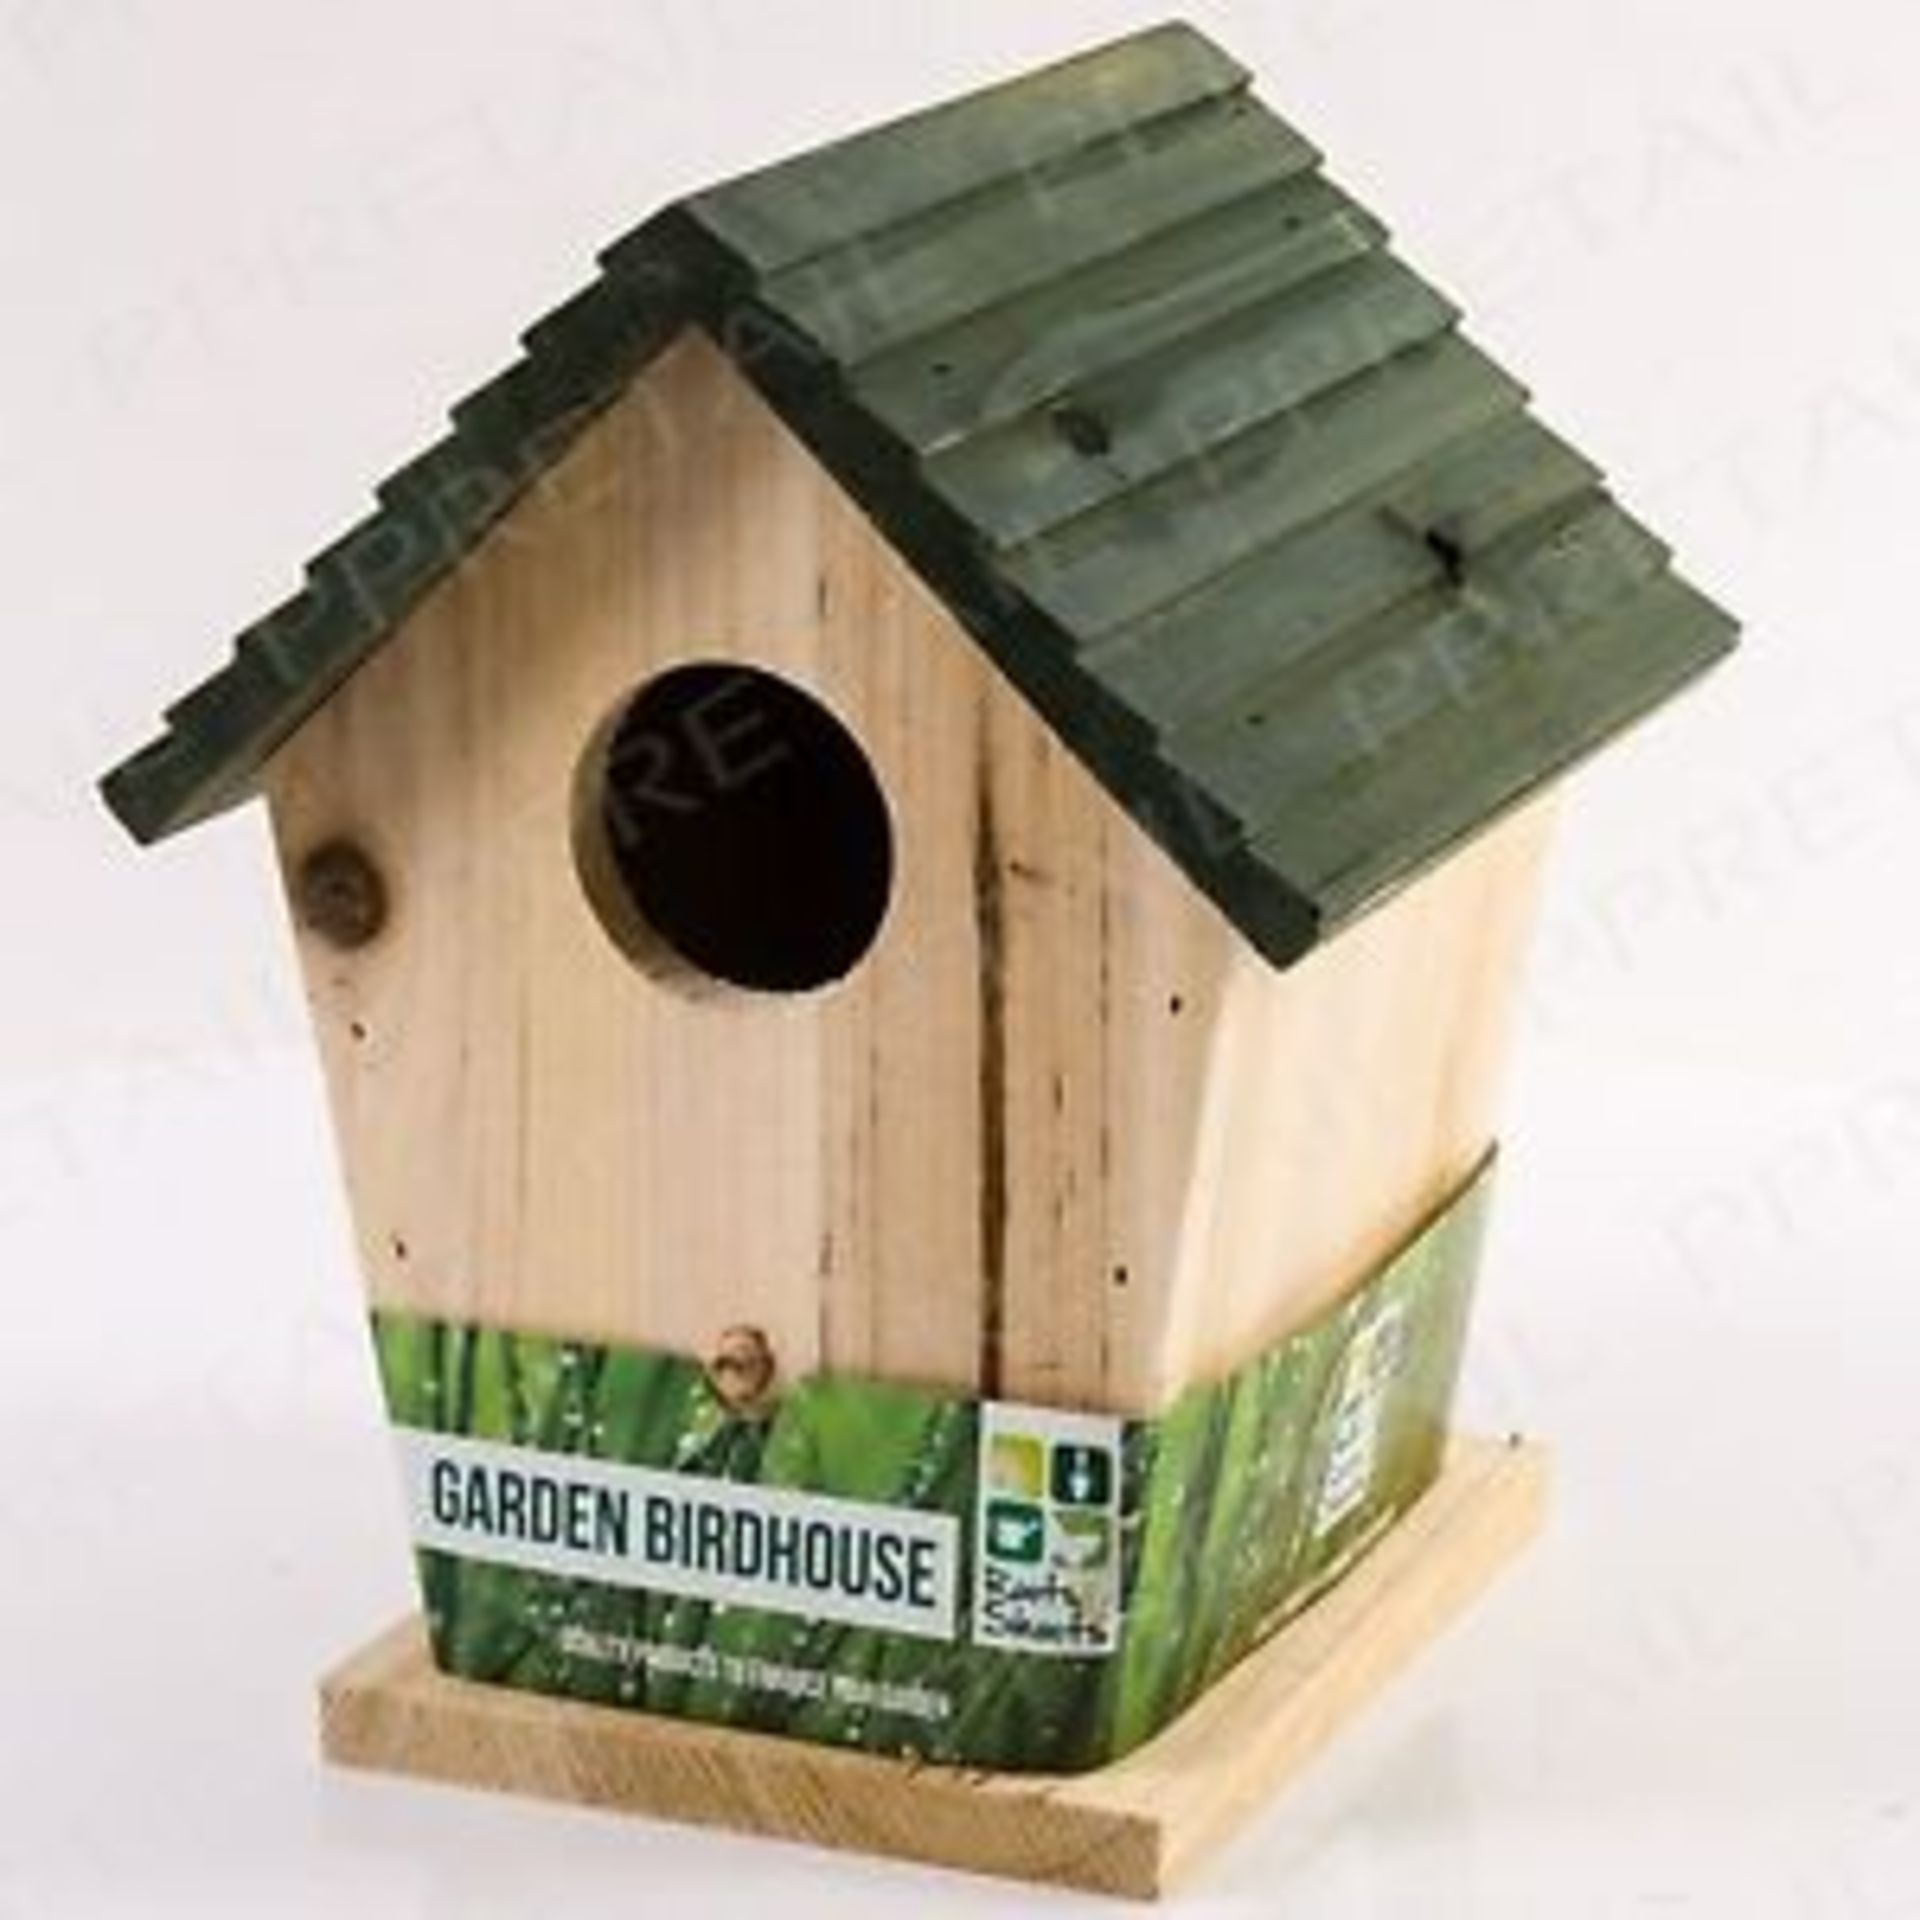 V *TRADE QTY* Brand New Wooden Birdhouse With Pitched Roof And Perch X 4 YOUR BID PRICE TO BE